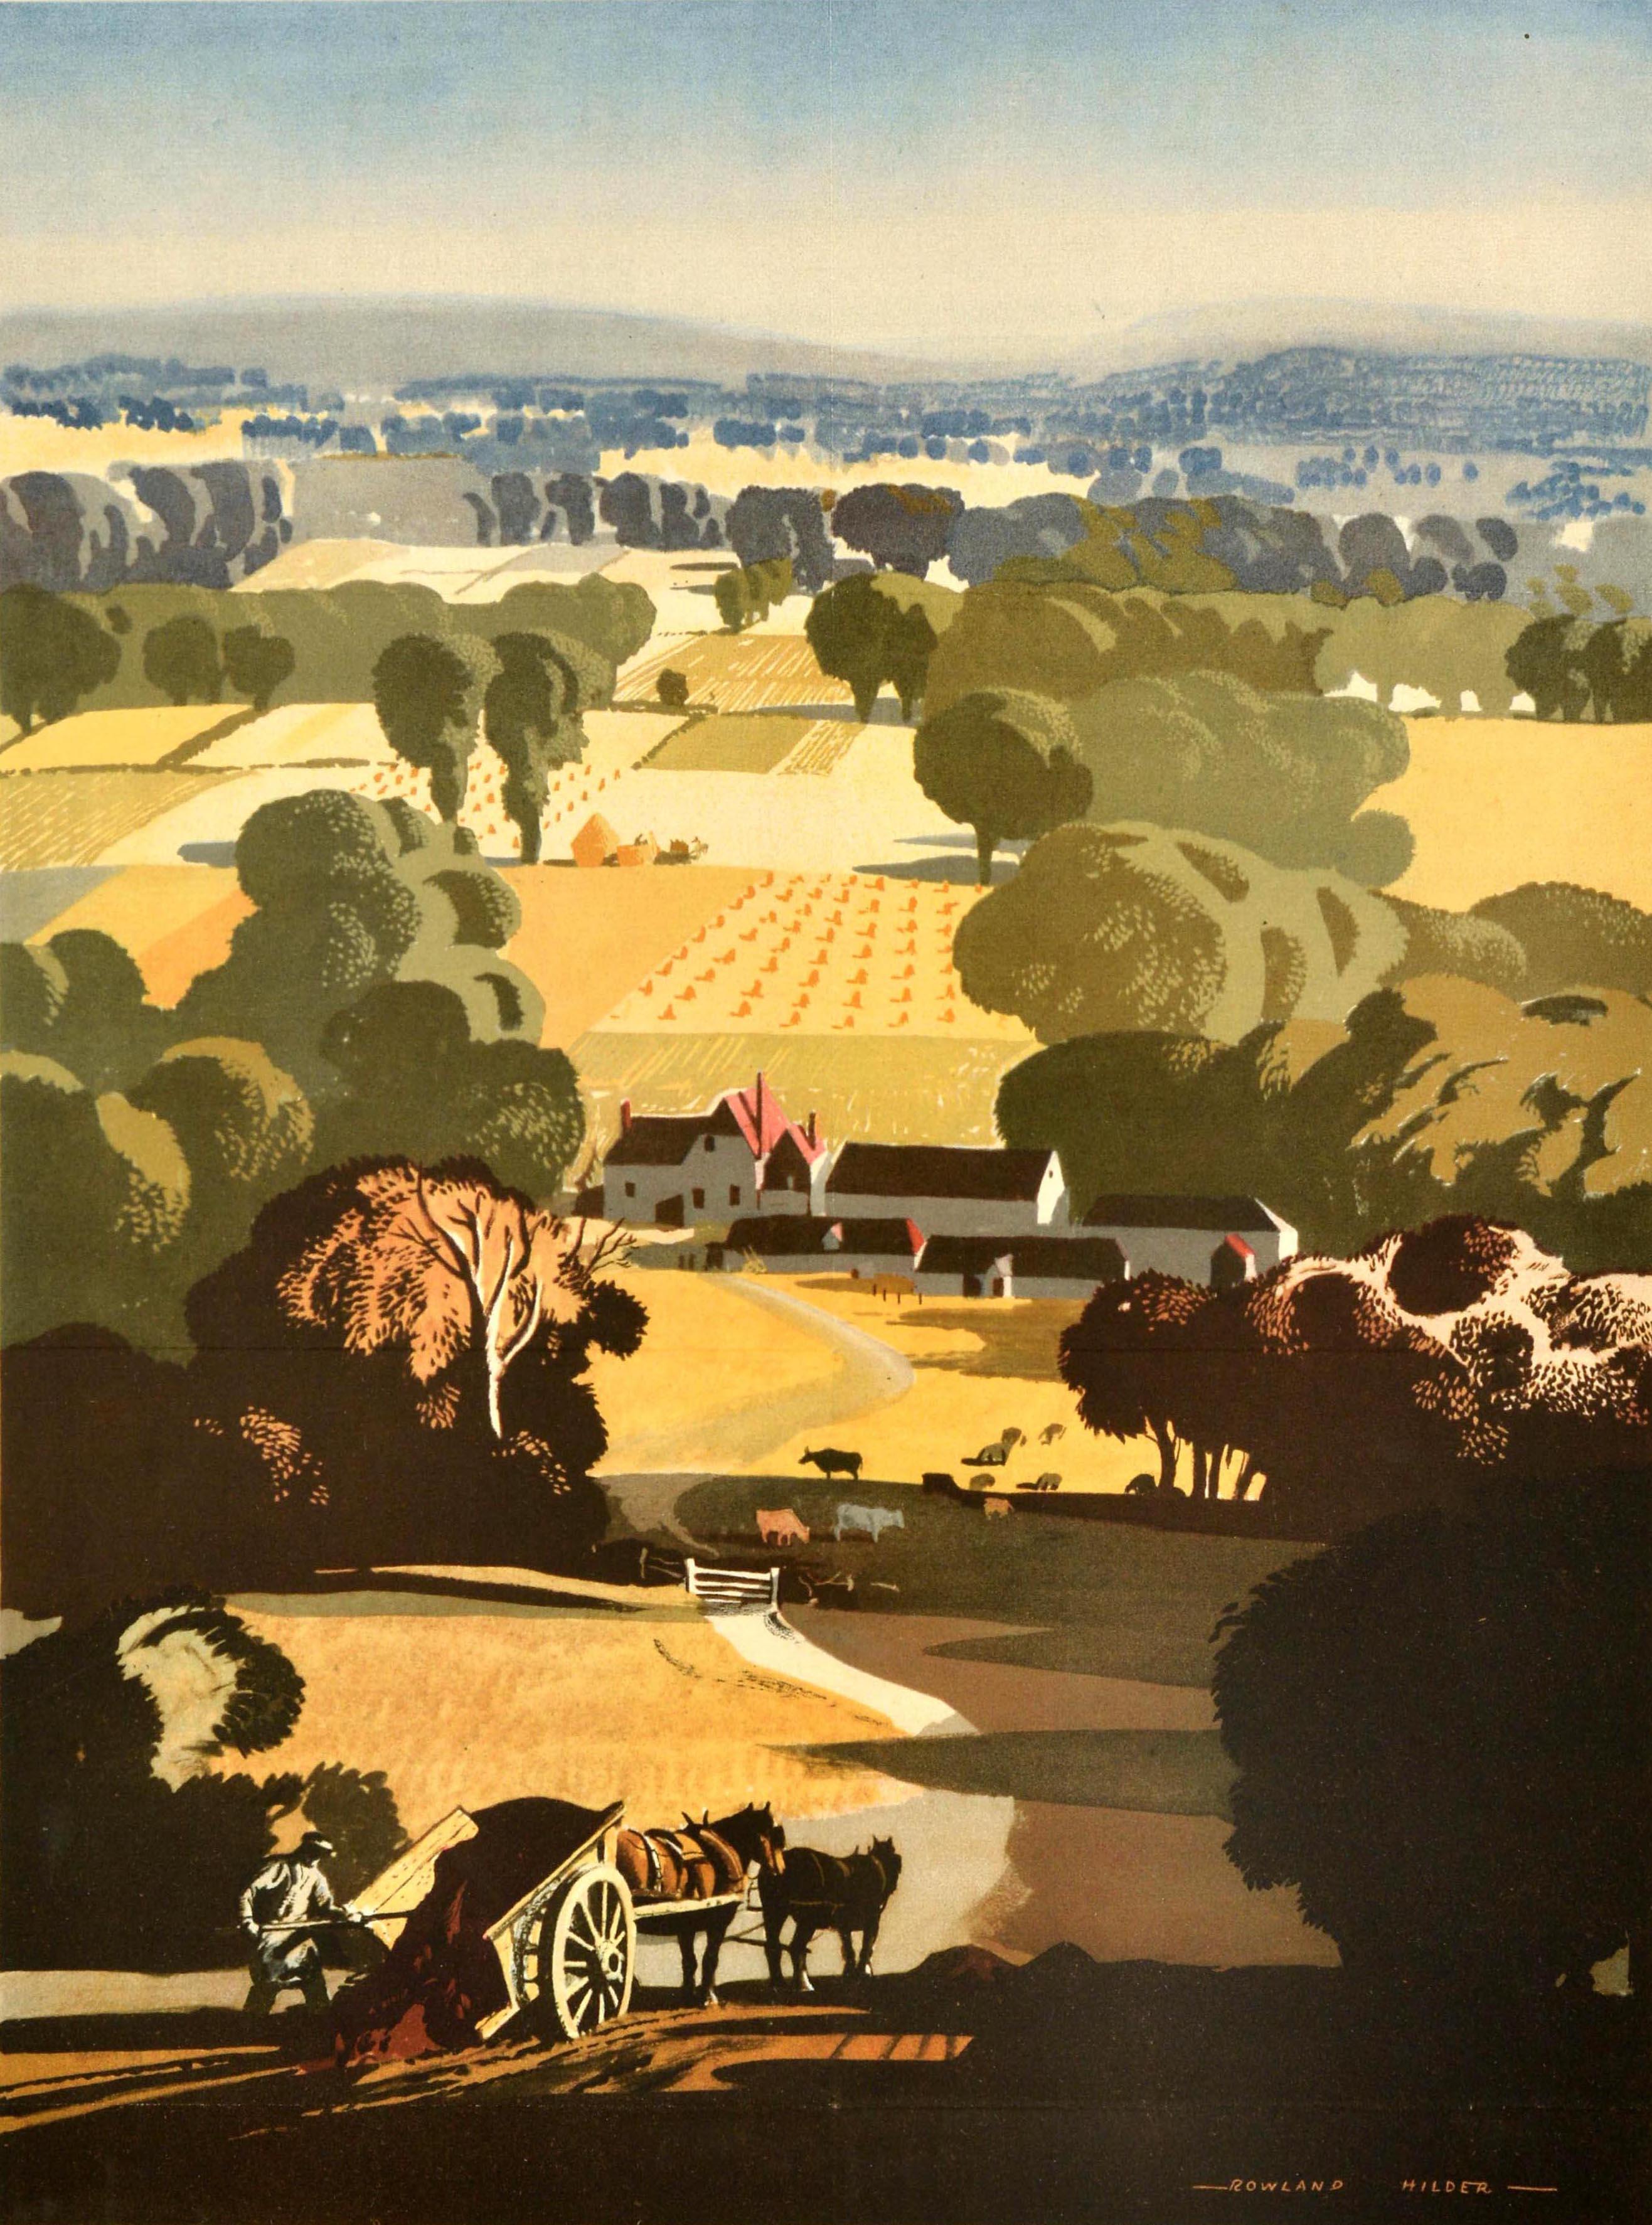 Original vintage World War Two poster - To Enjoy the Fruits of Victory Save Now - featuring a countryside illustration From the original by Rowland Hilder (1905-1993) depicting a rural landscape with a farmer and a horse draw cart in the foreground,